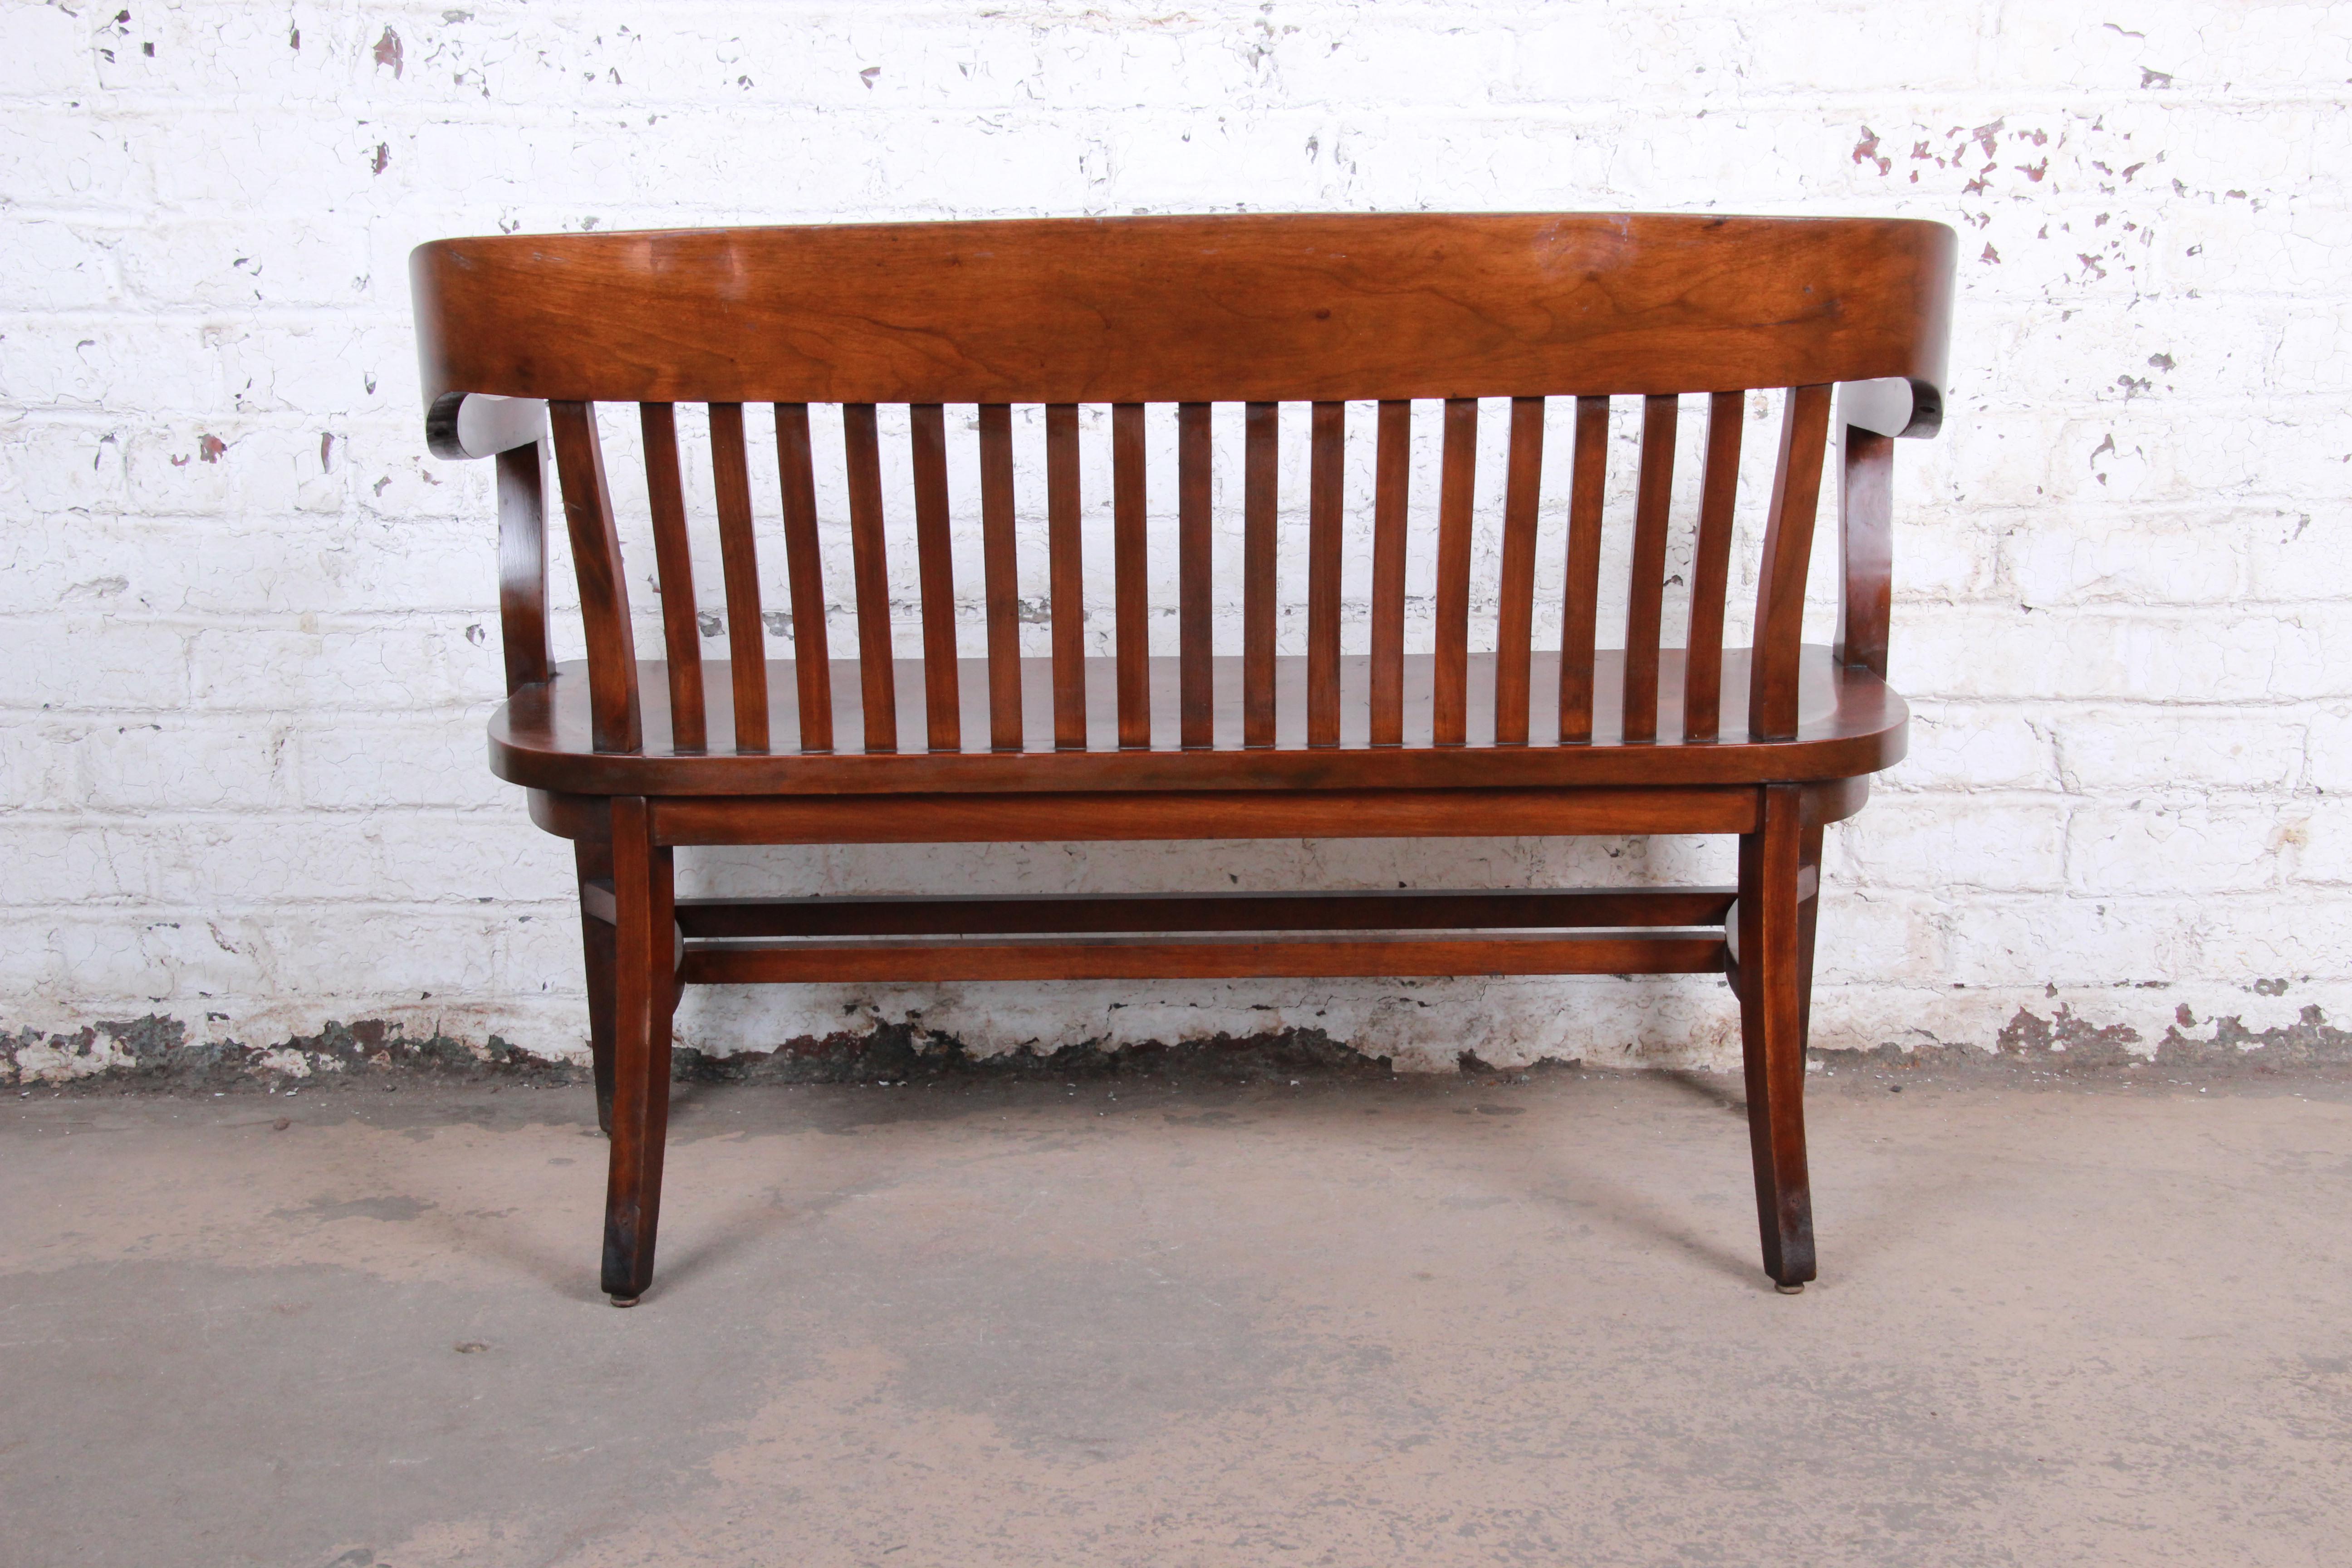 Mid-20th Century Antique Heywood-Wakefield Solid Walnut Lawyer's Bench